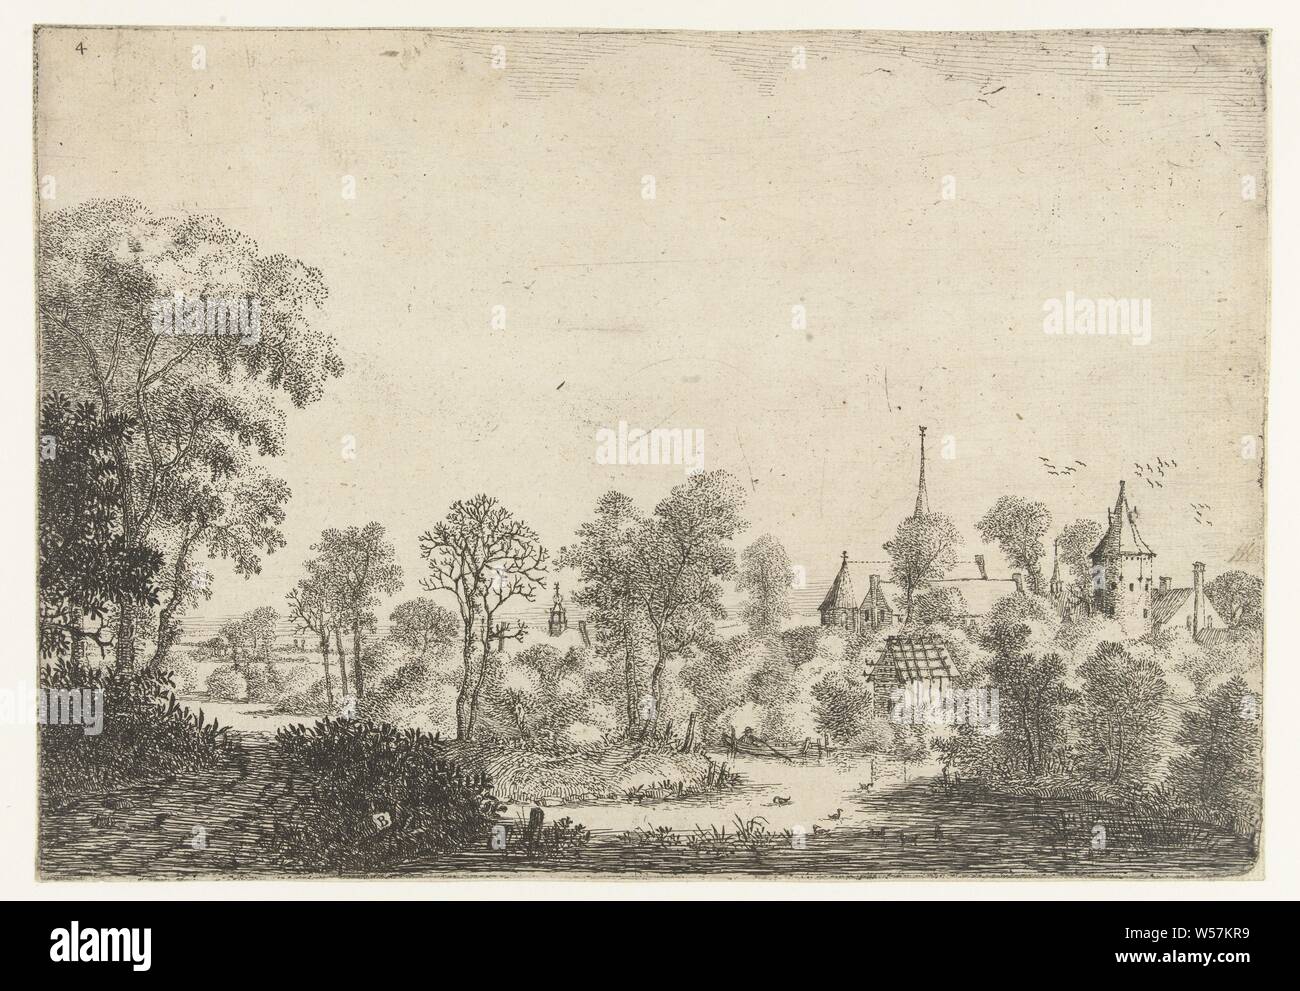 Landscape with view of village and man in boat Landscapes (series title), Jan van Brosterhuyzen (mentioned on object), Netherlands, 1610 - 1650, paper, etching, h 162 mm × w 234 mm Stock Photo